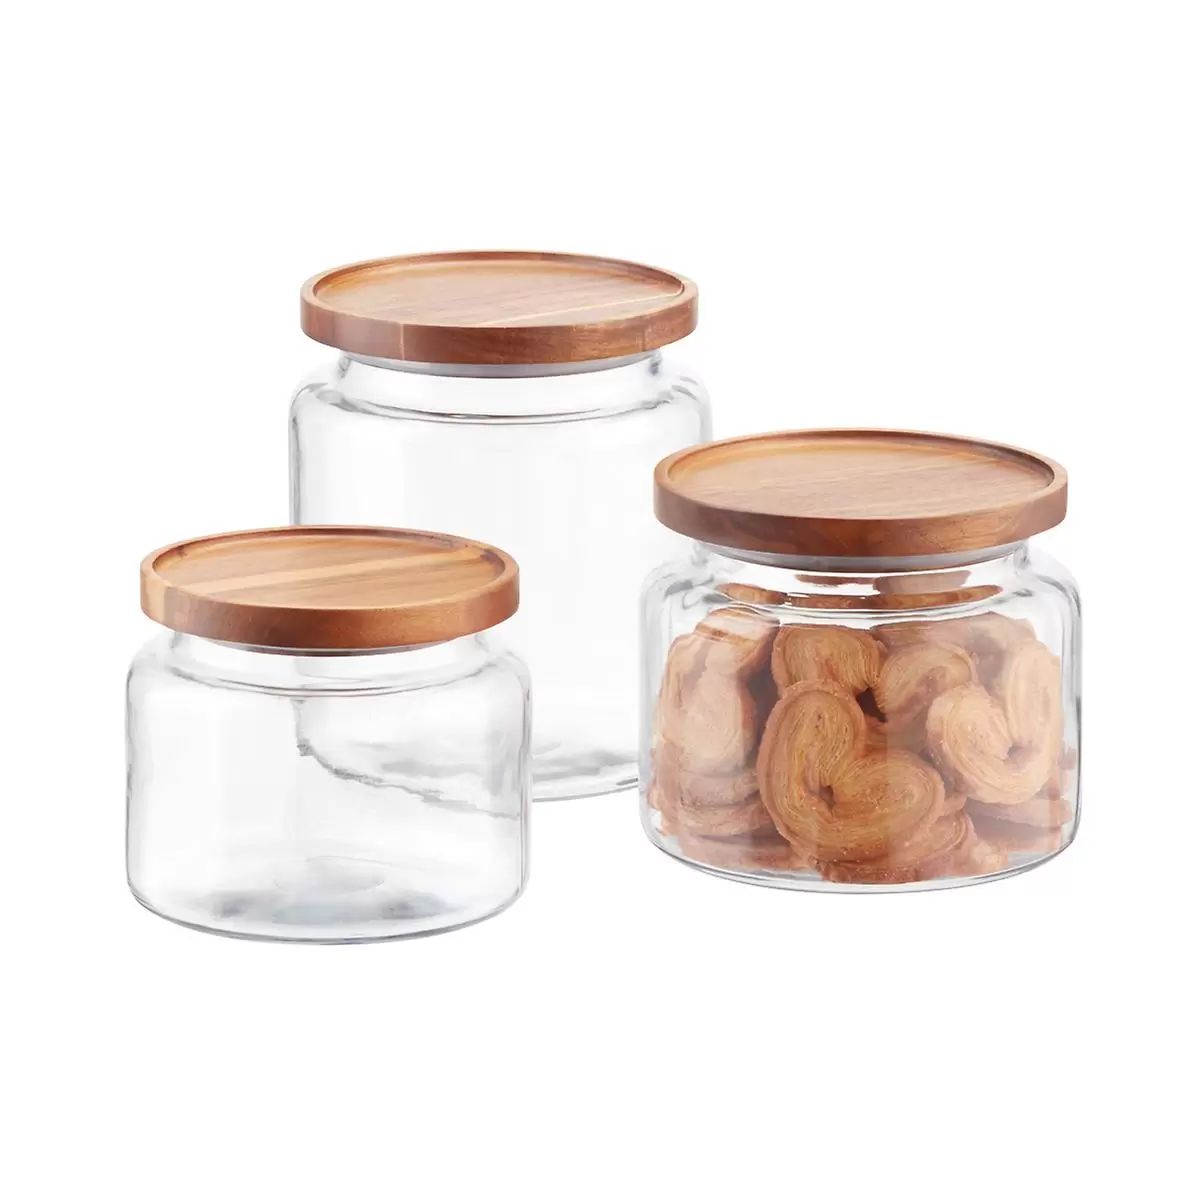 anchor 1.5 qt. Montana Jar Acacia Lid | The Container Store